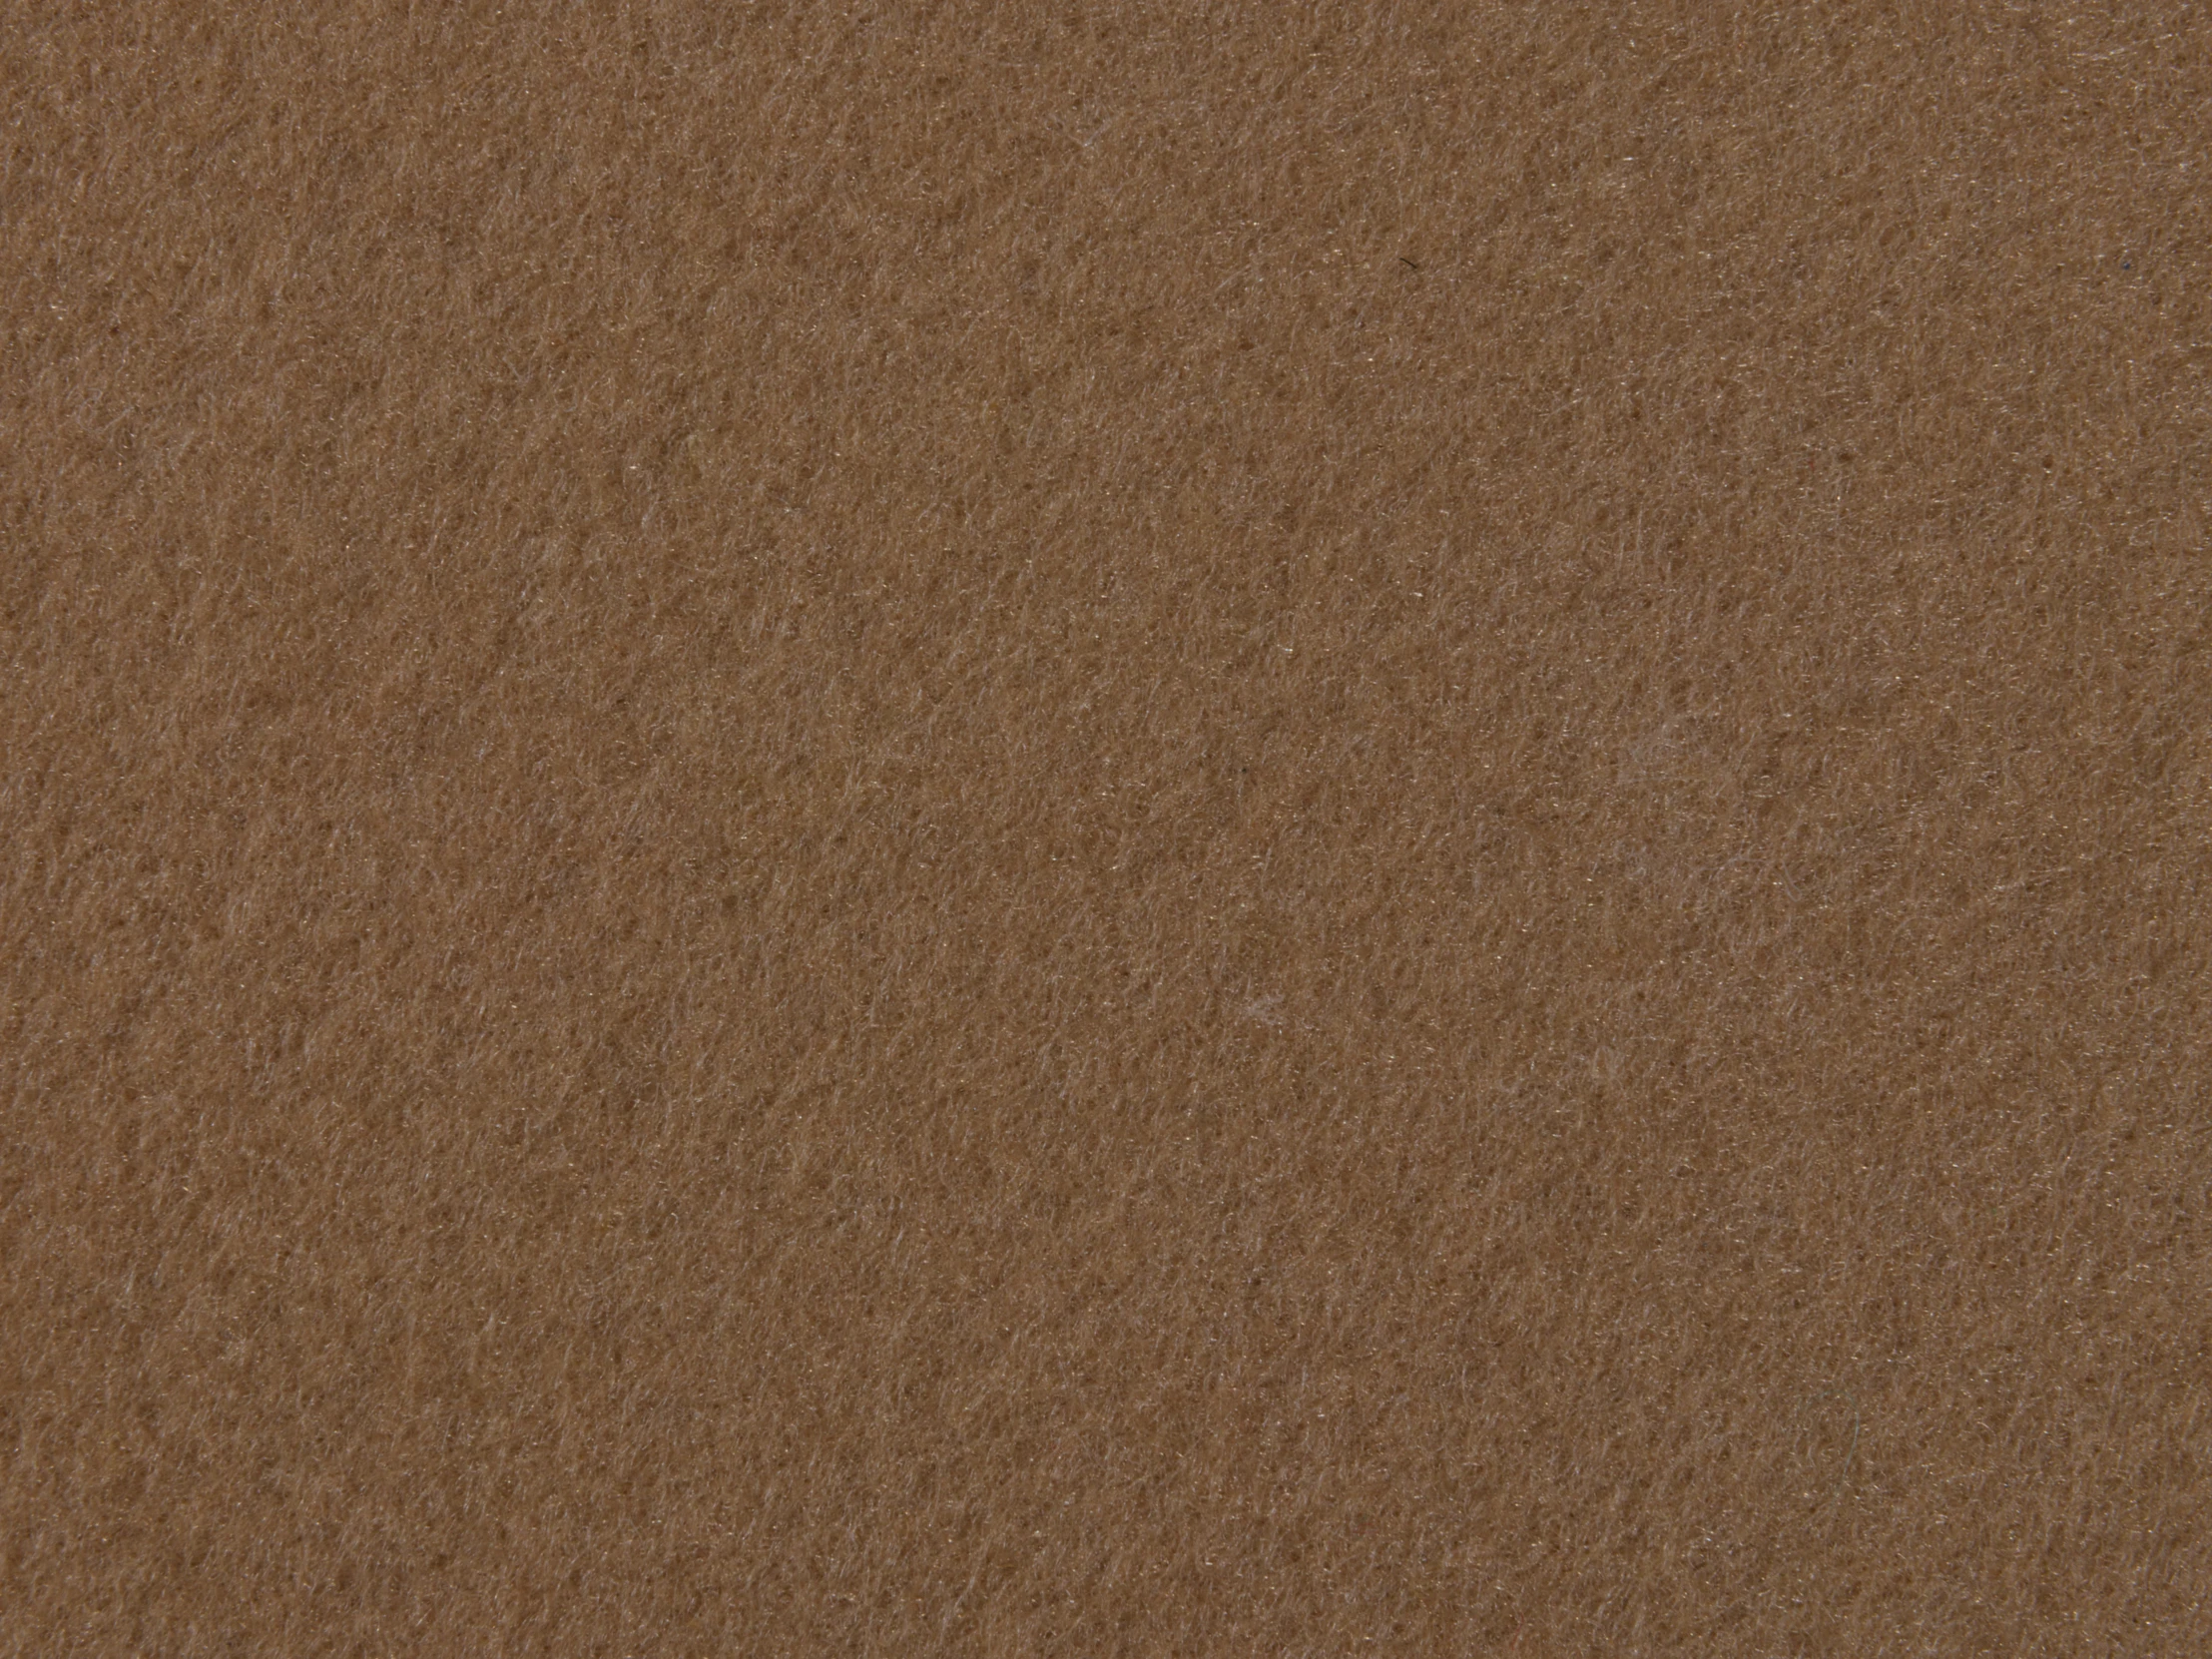 a brown background with some spots and small white circles